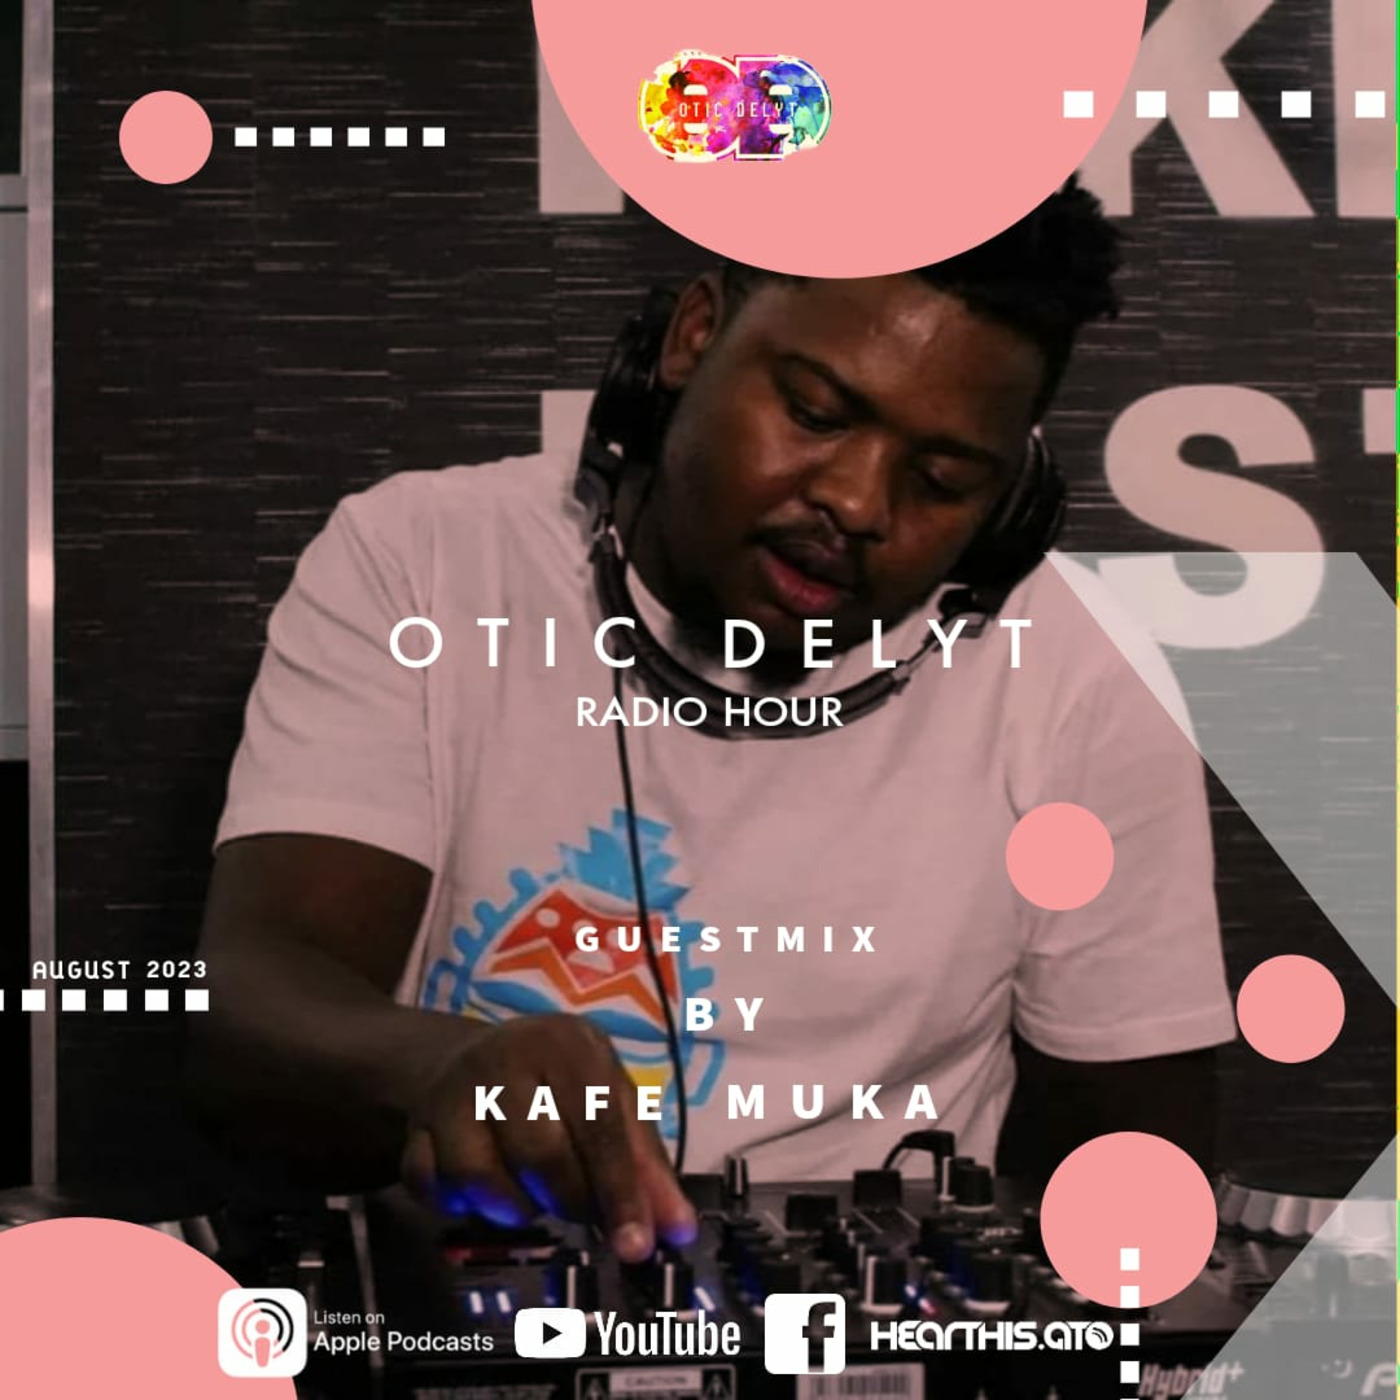 Otic Delyt Radio Hour #073 Guest Mix By Kafe'Muka